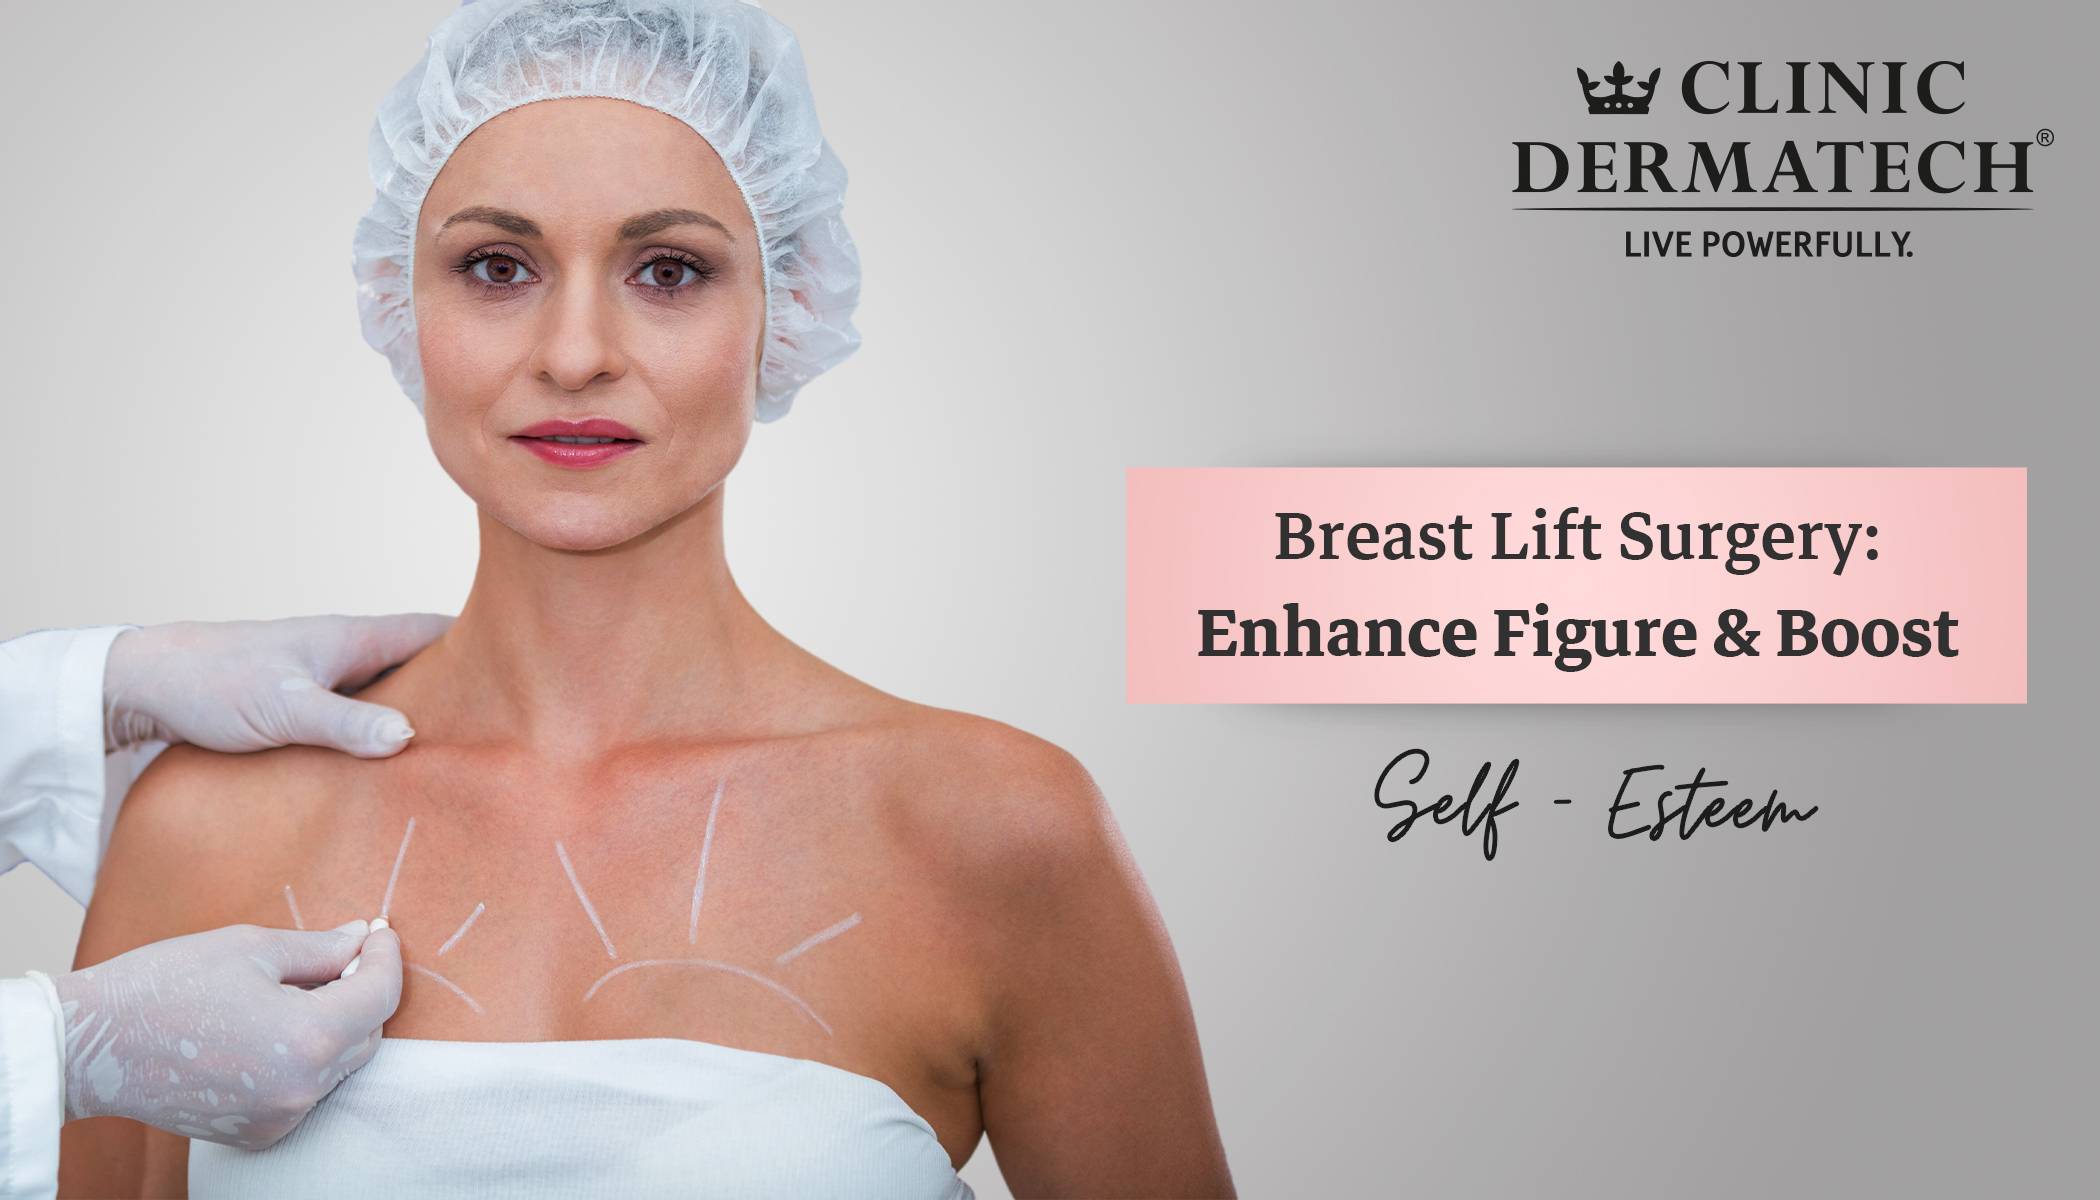 Complete Guide to Breast Reduction Surgery in India